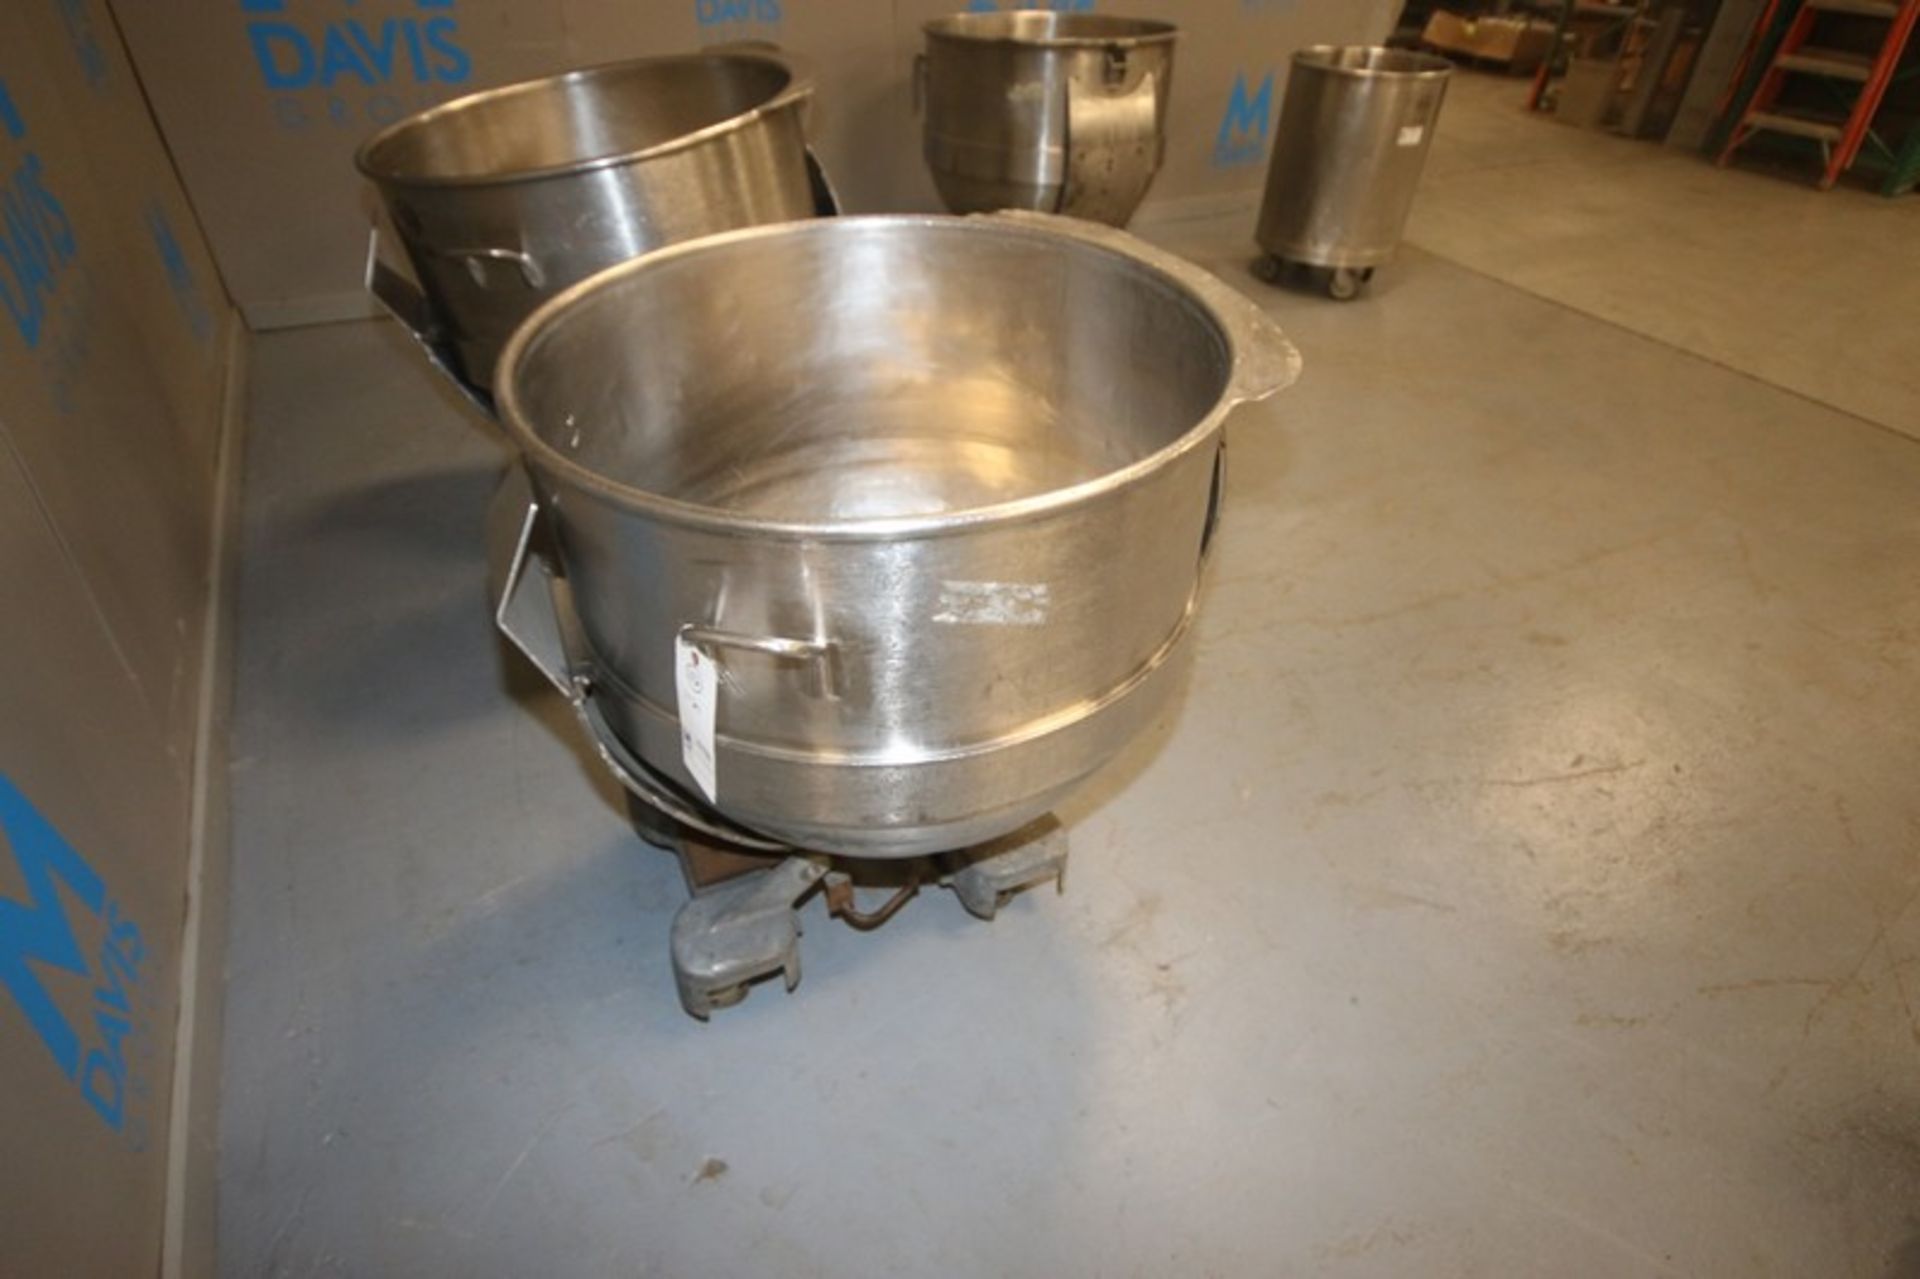 S/S Mixing Bowl, Internal Dims.:  Aprox. 32-1/2" Dia. x 26-1/2" Deep, Mounted on Portable Cart ( - Image 6 of 8